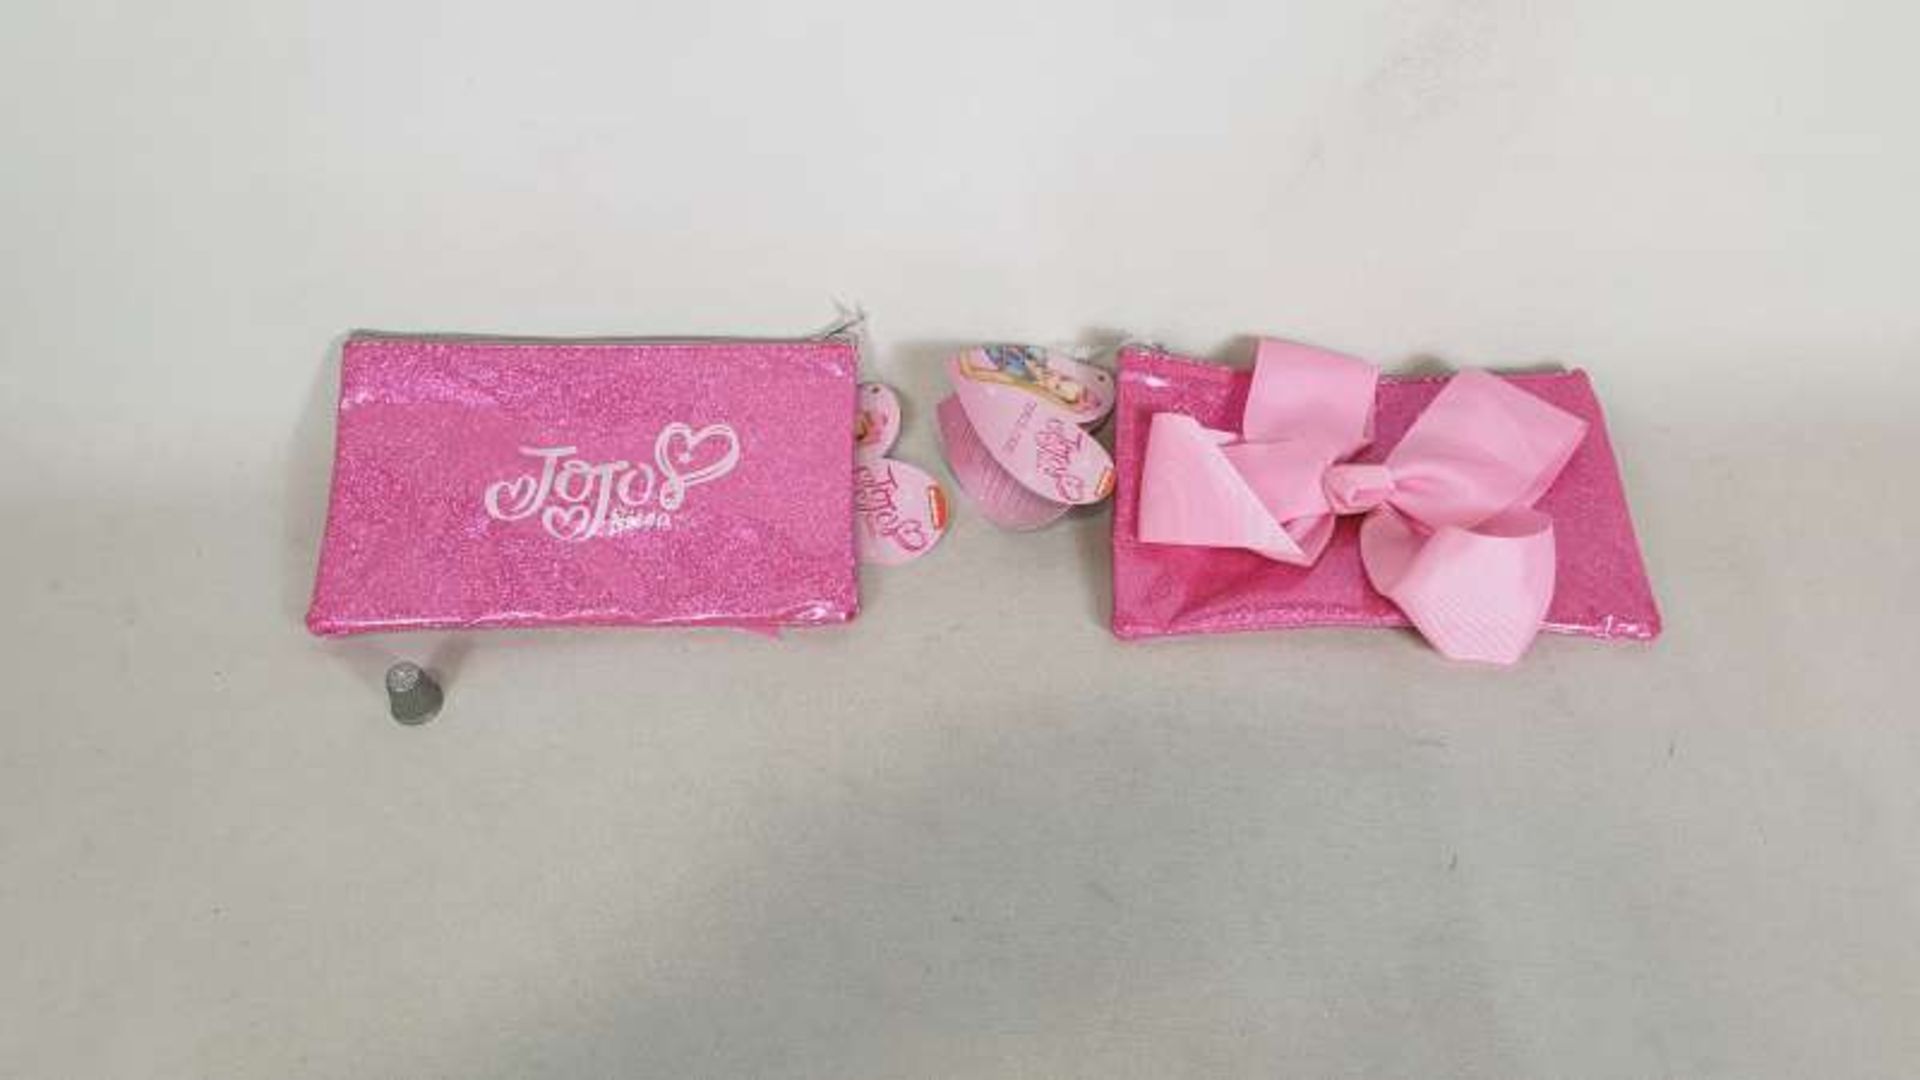 144 X JOJO SIWA BOW SHAPED PENCIL CASES IN 3 BOXES